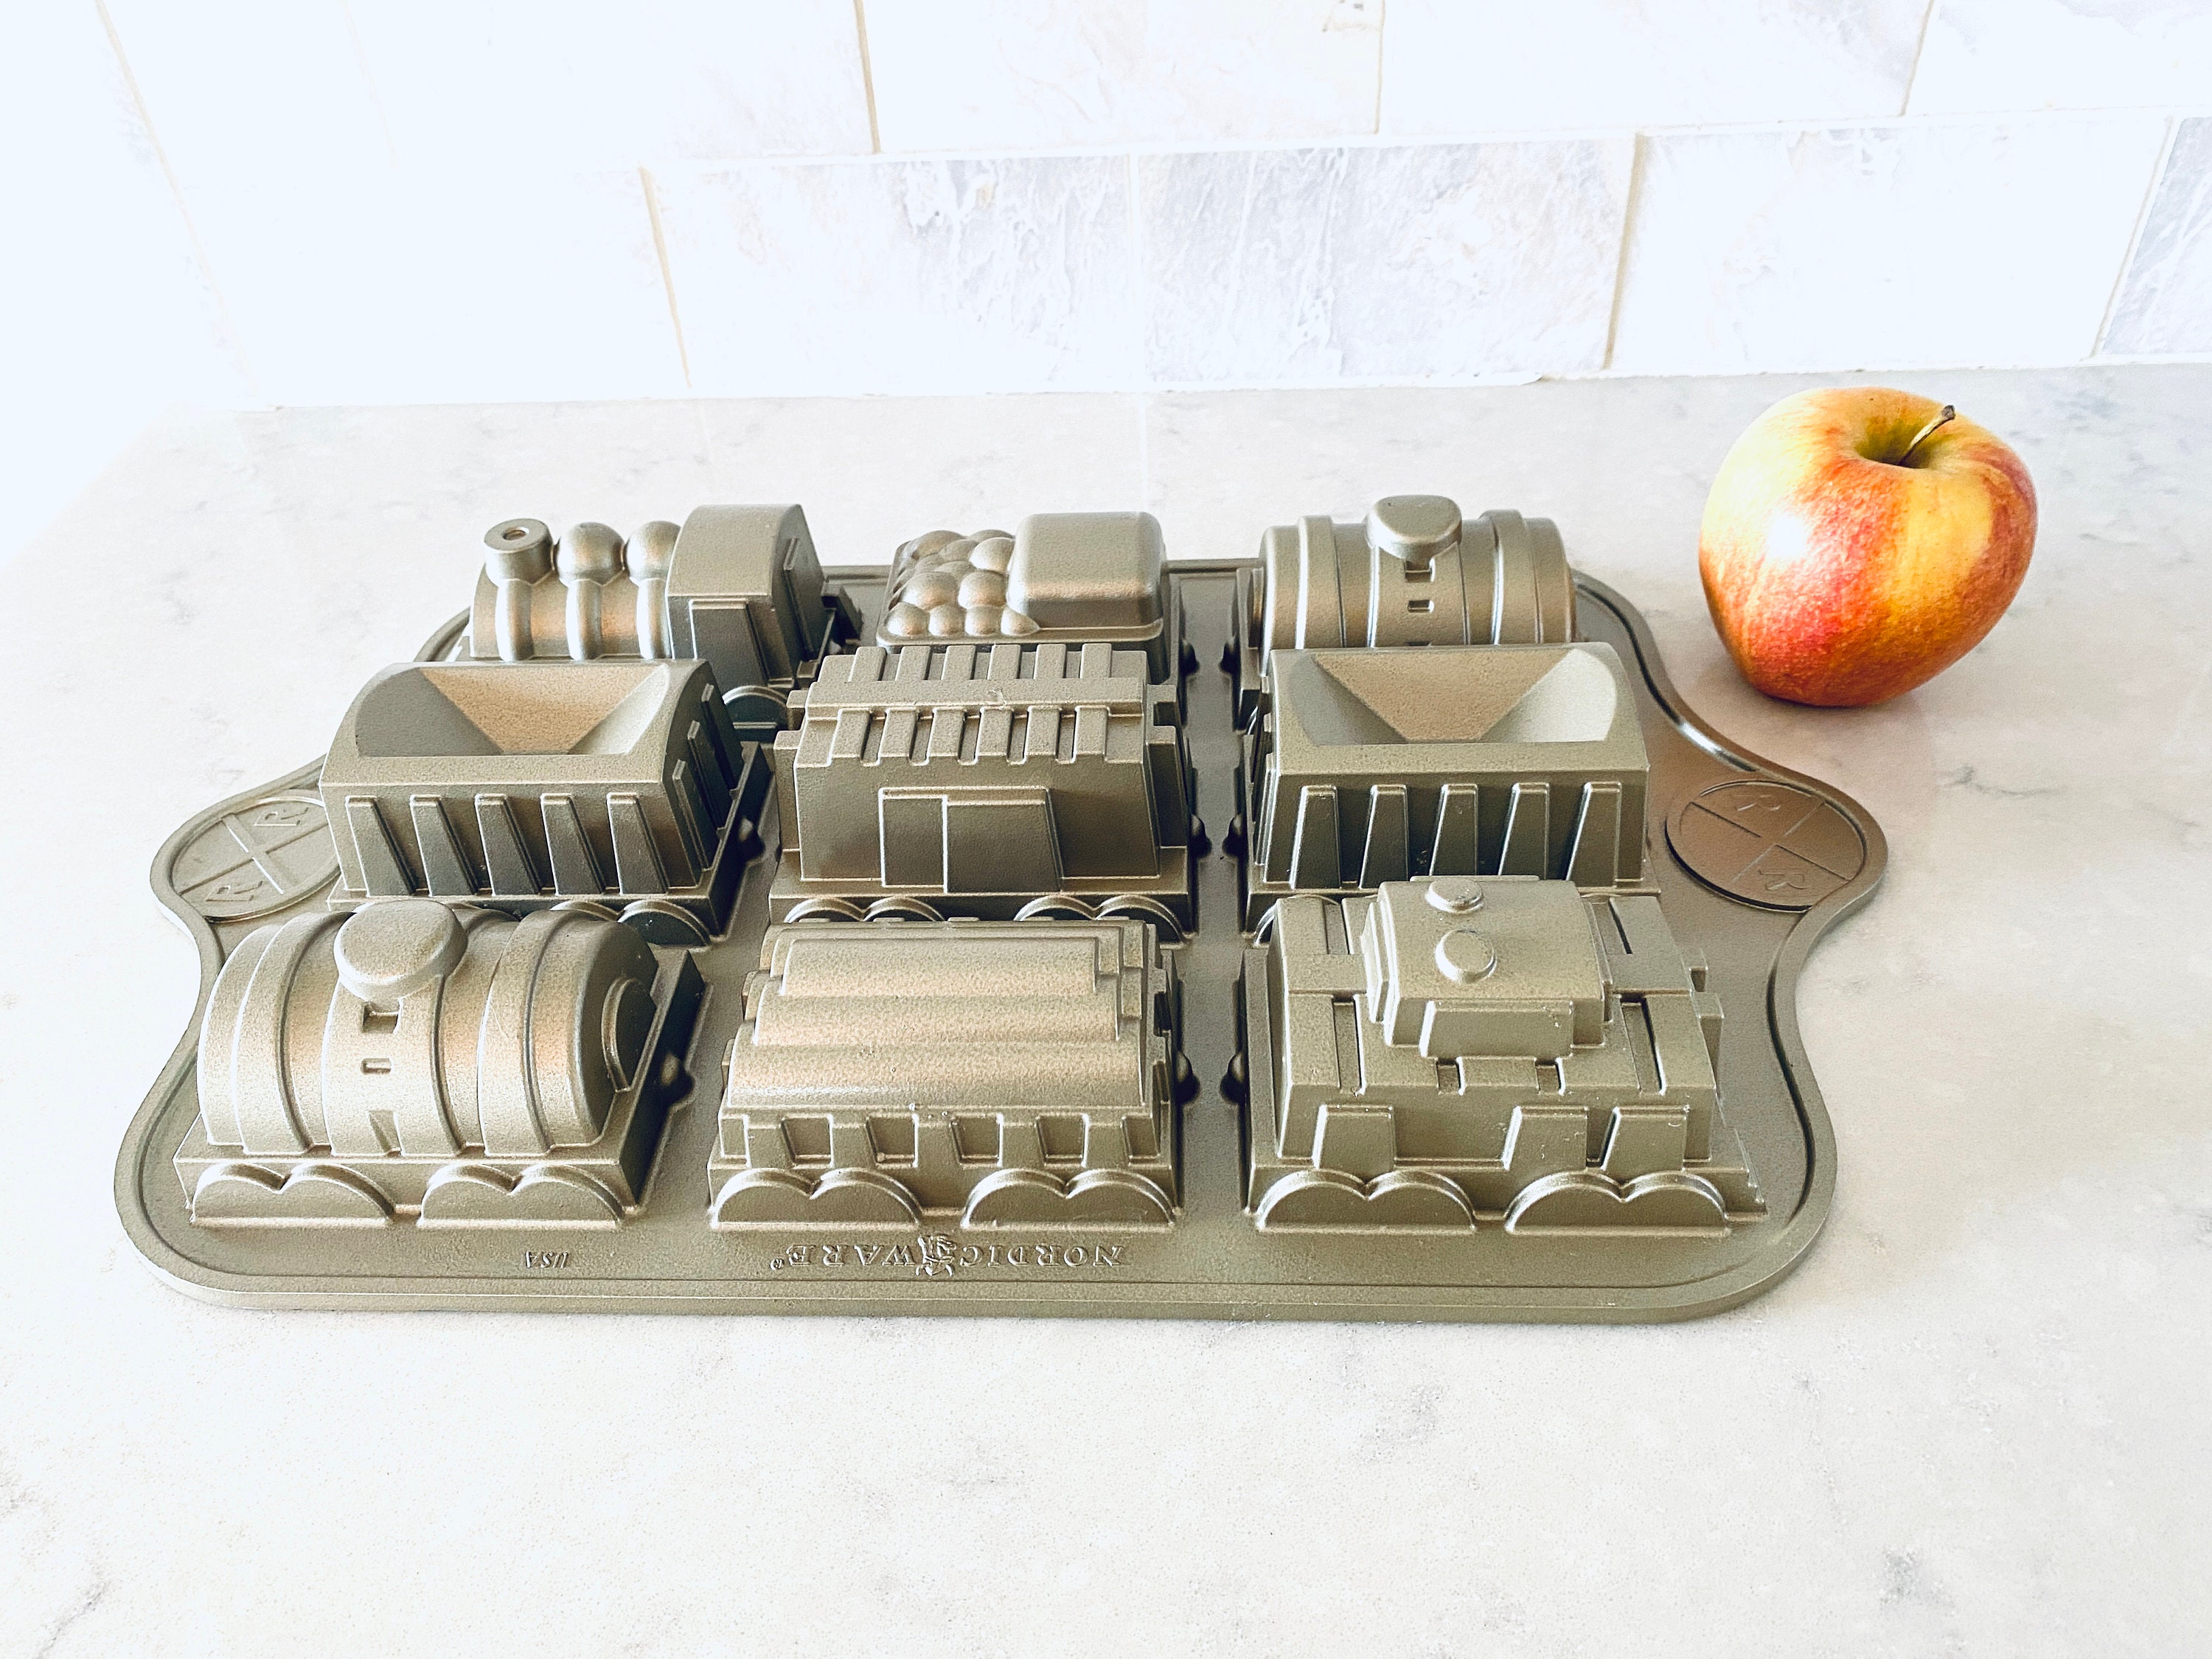 Train Cakes Using The Williams Sonoma Train Cake Pan By Nordic